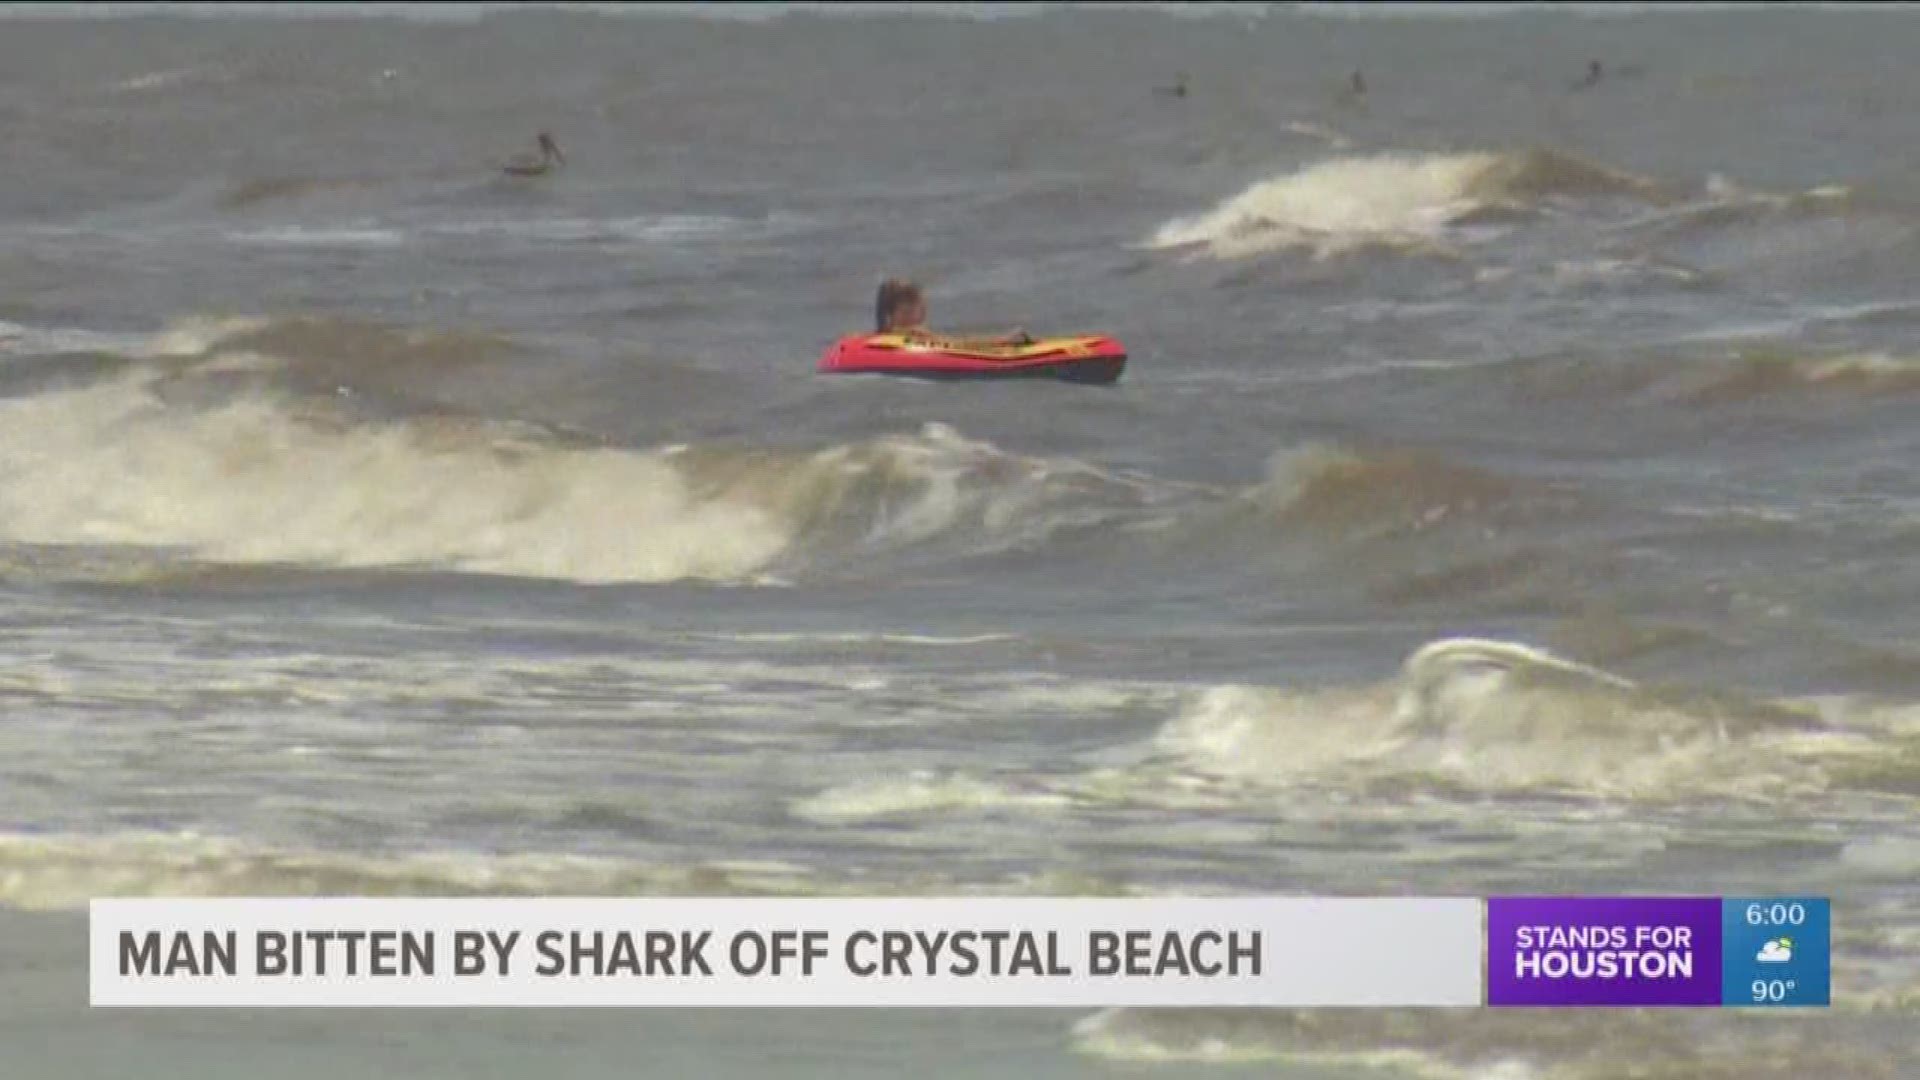 A beachgoer was rushed to the hospital Thursday after being bitten by a shark near Crystal Beach on Bolivar Peninsula. The victim reportedly told paramedics: "The shark bumped me. Then he wanted to taste me."